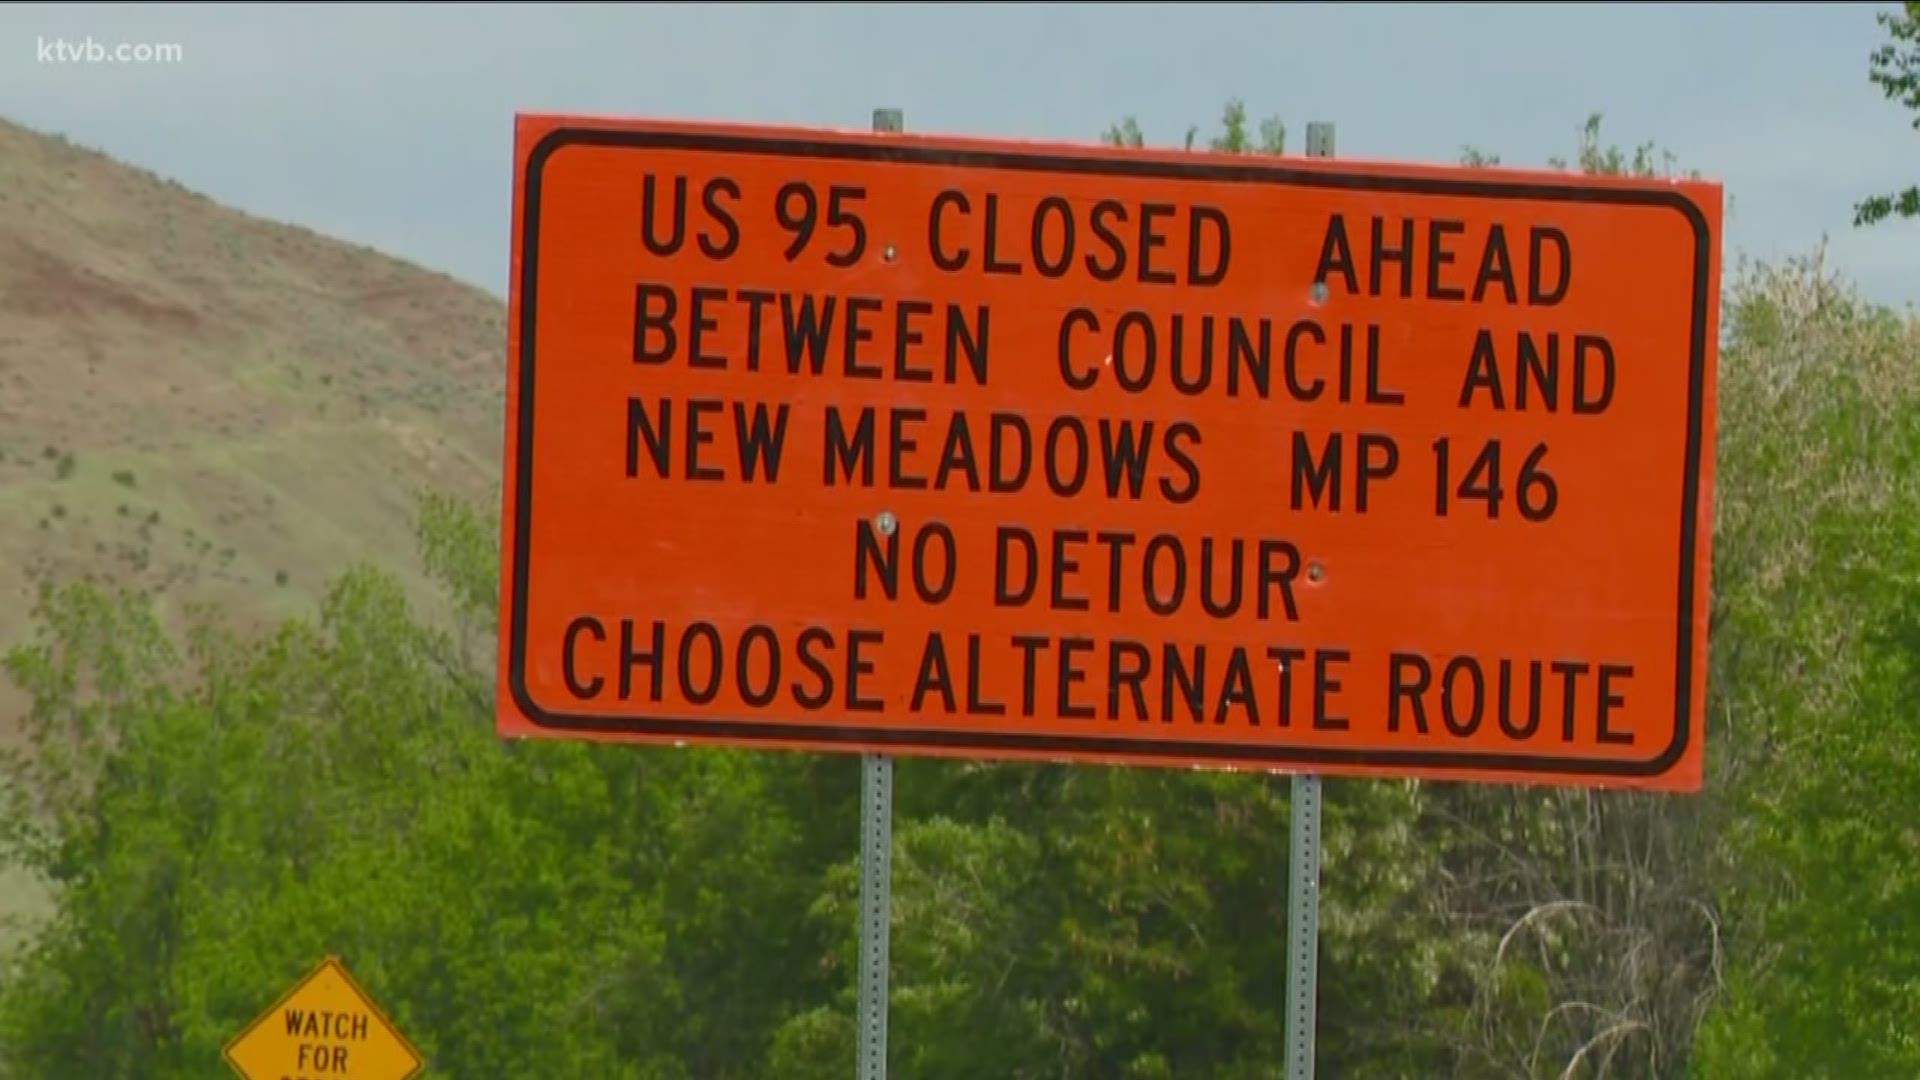 The signs said Highway 95 was completely closed for an eight-mile stretch. After KTVB contacted ITD about the signs, crews began covering up the incorrect signs.